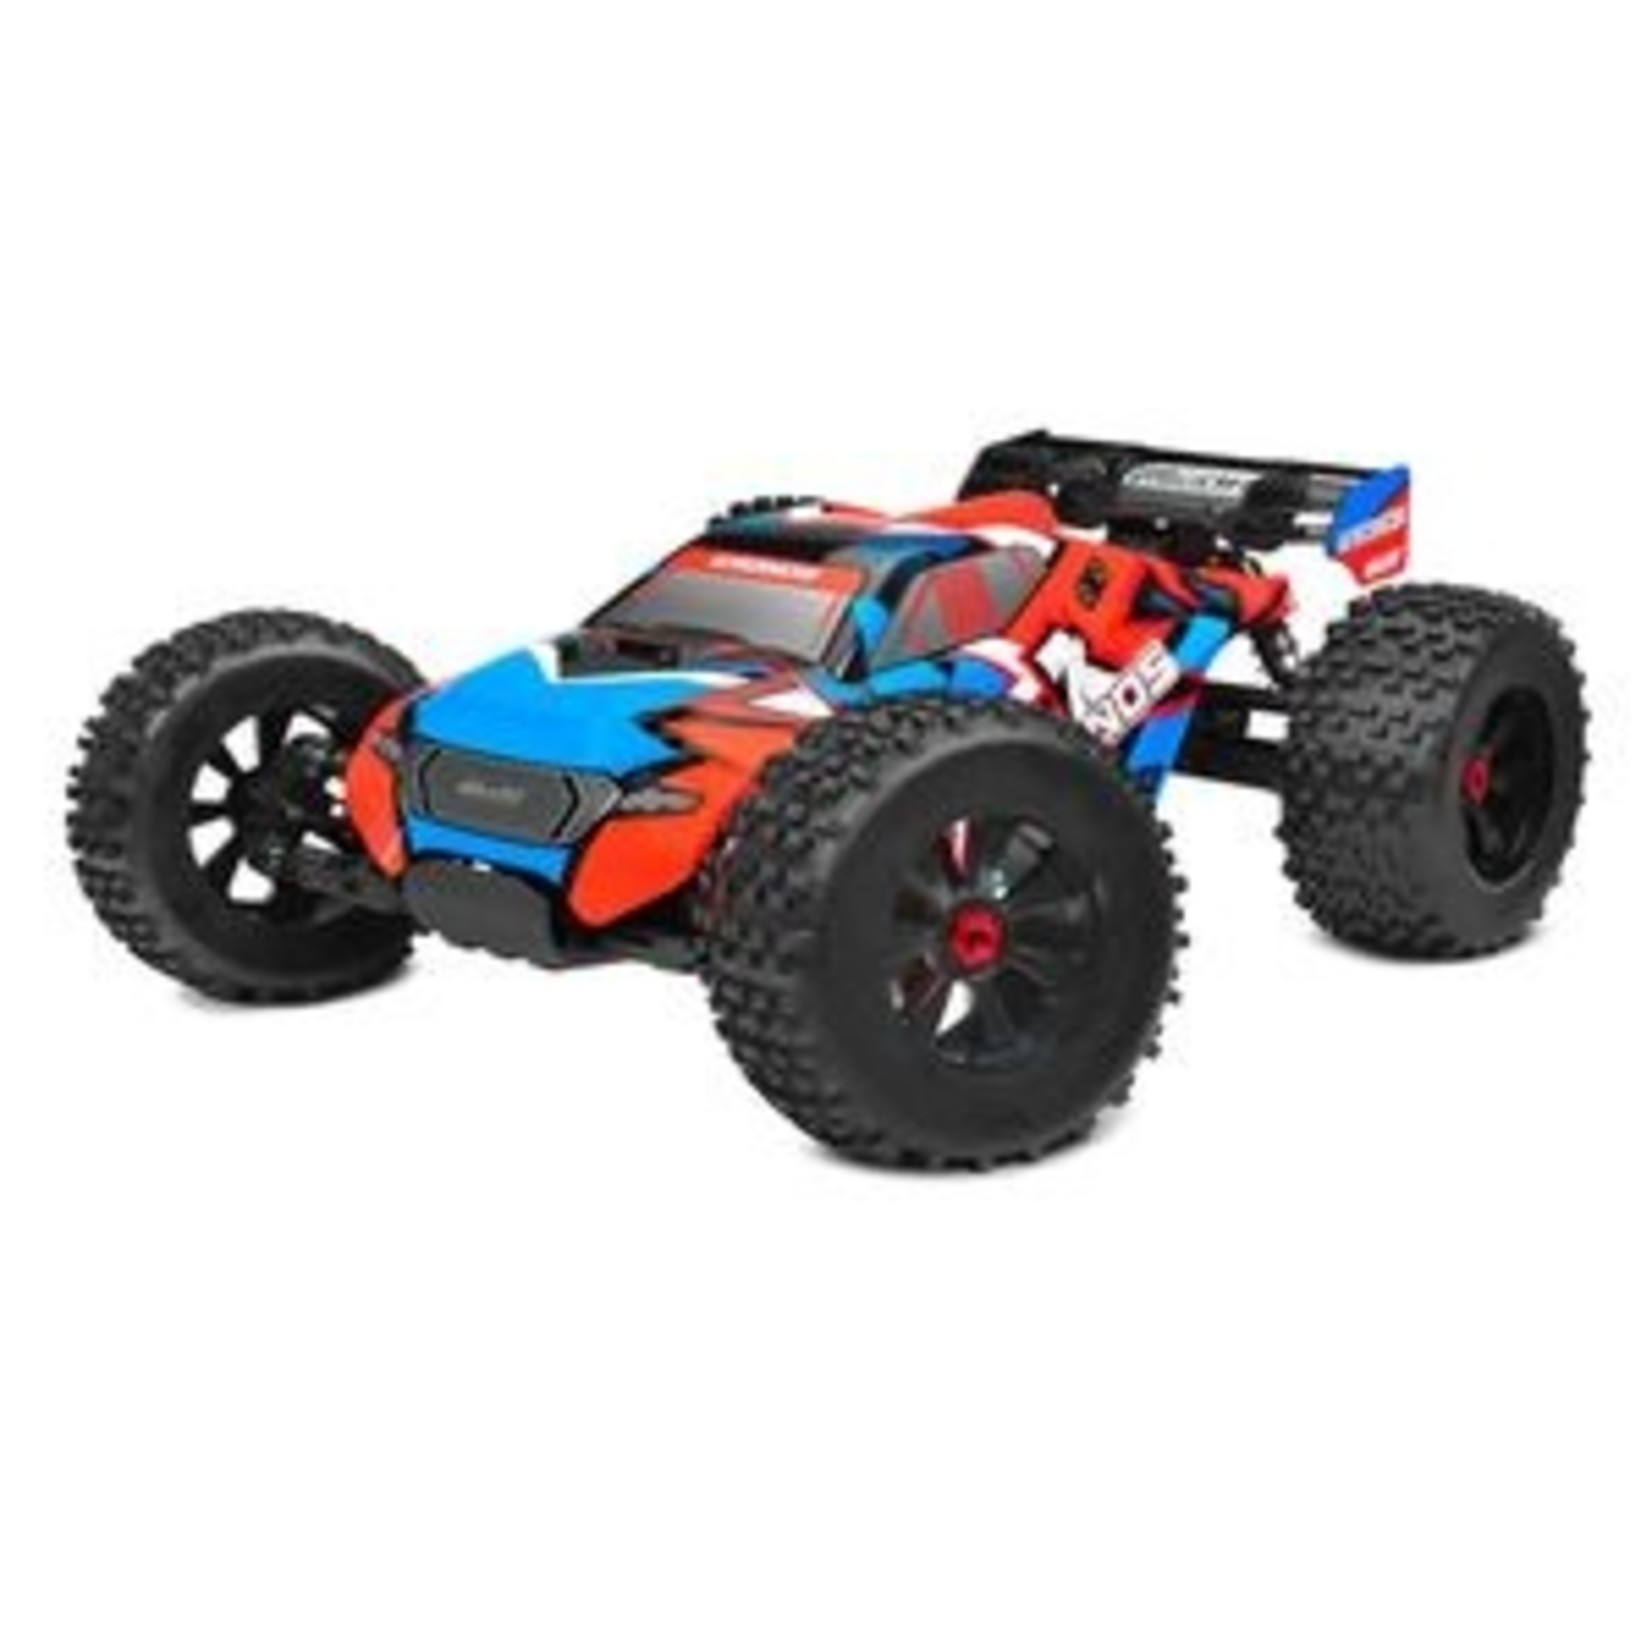 Corally (Team Corally) 1/8 Kronos XP 4WD Monster Truck 6S Brushless RTR (No Battery or Charger)